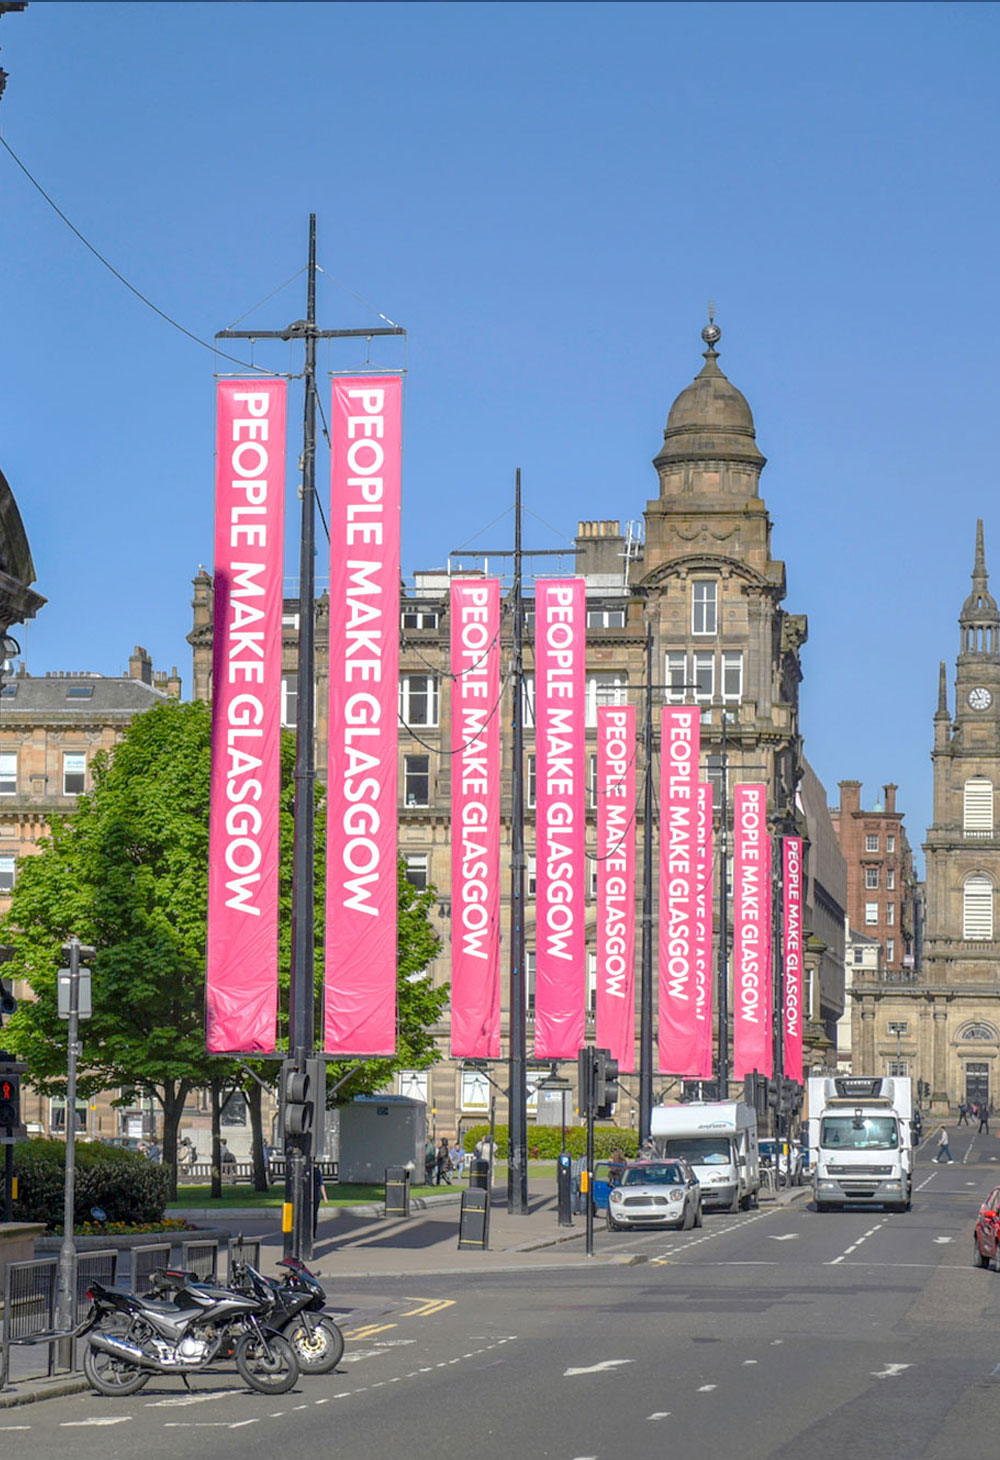 Street view of Glasgow's George Street looking towards George Square and St George's Tron Church (Nelson Mandela Place). with bright pink People Make Glasgow (the city's brand slogan) banners